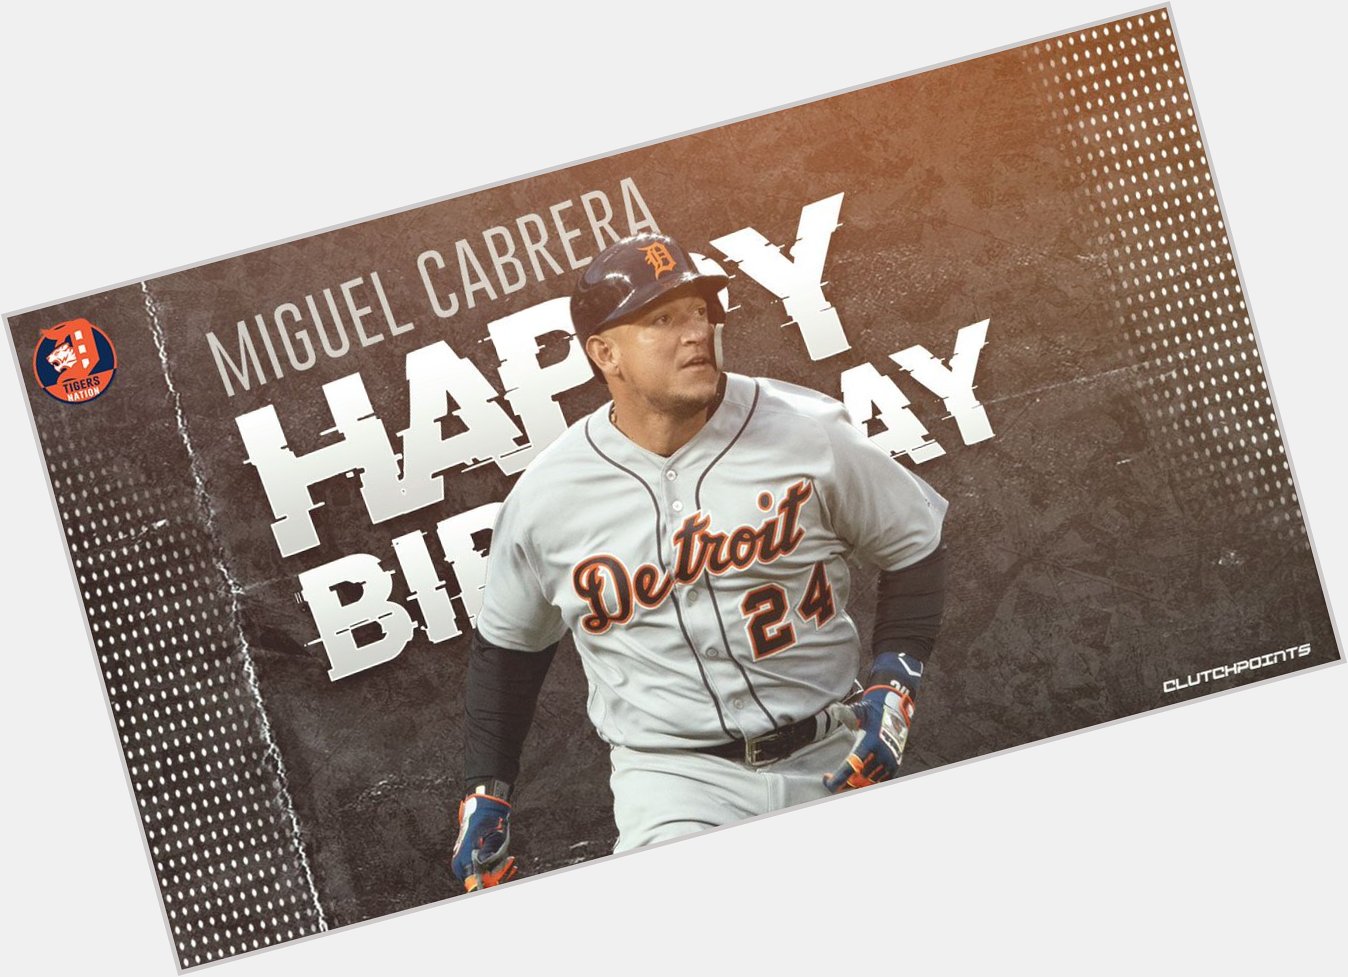 Join us in wishing Miguel Cabrera a happy birthday! 